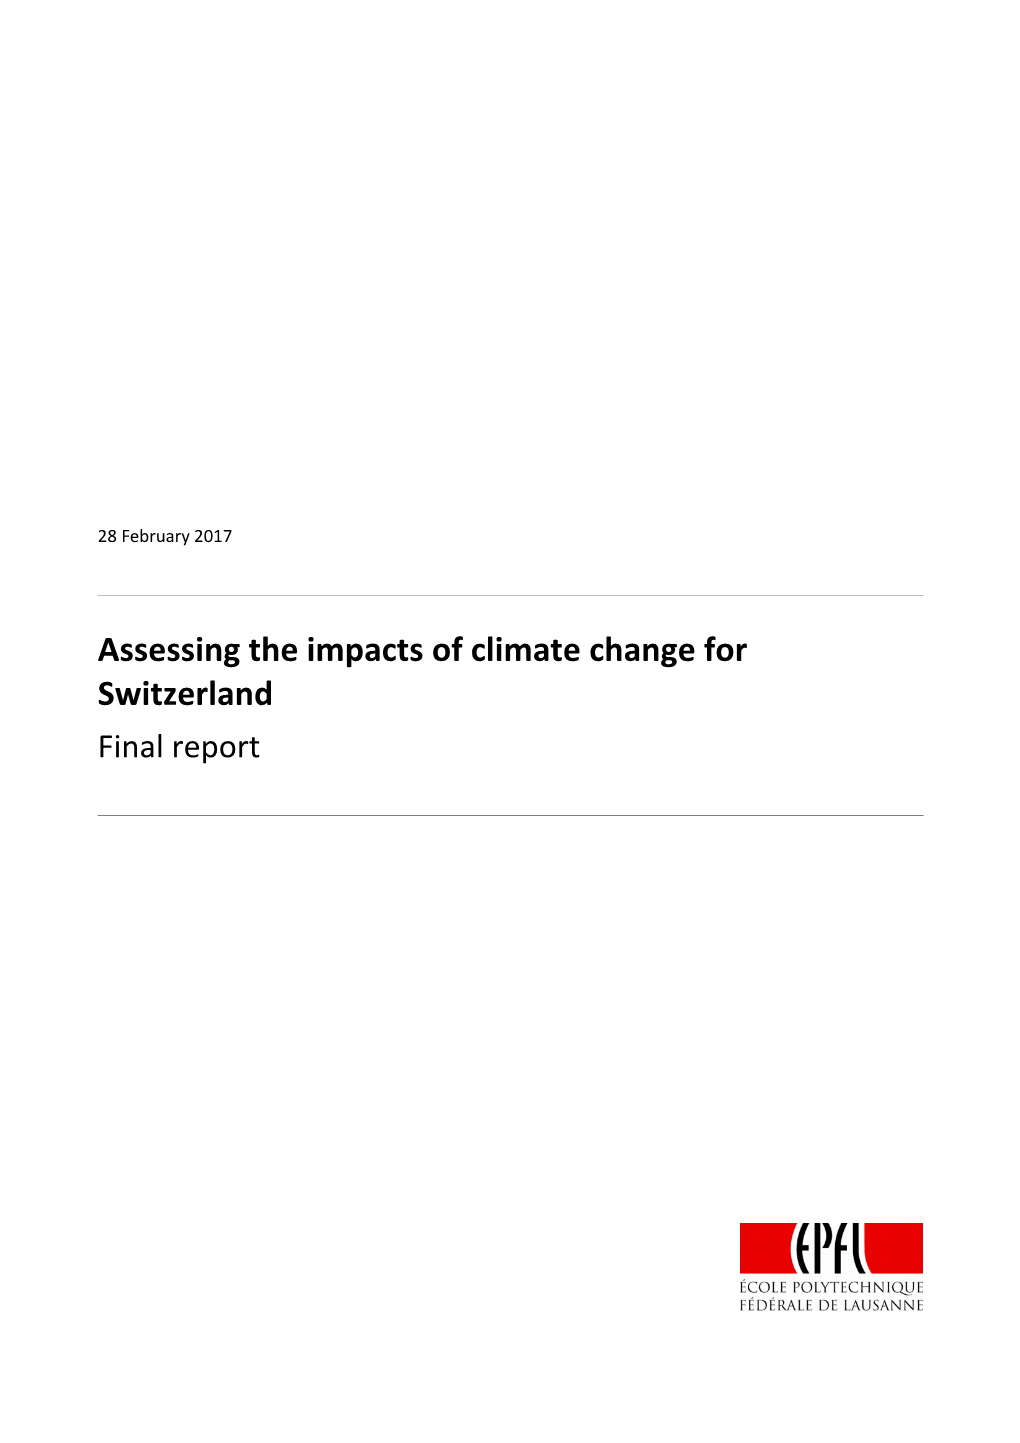 Assessing the Impacts of Climate Change for Switzerland Final Report